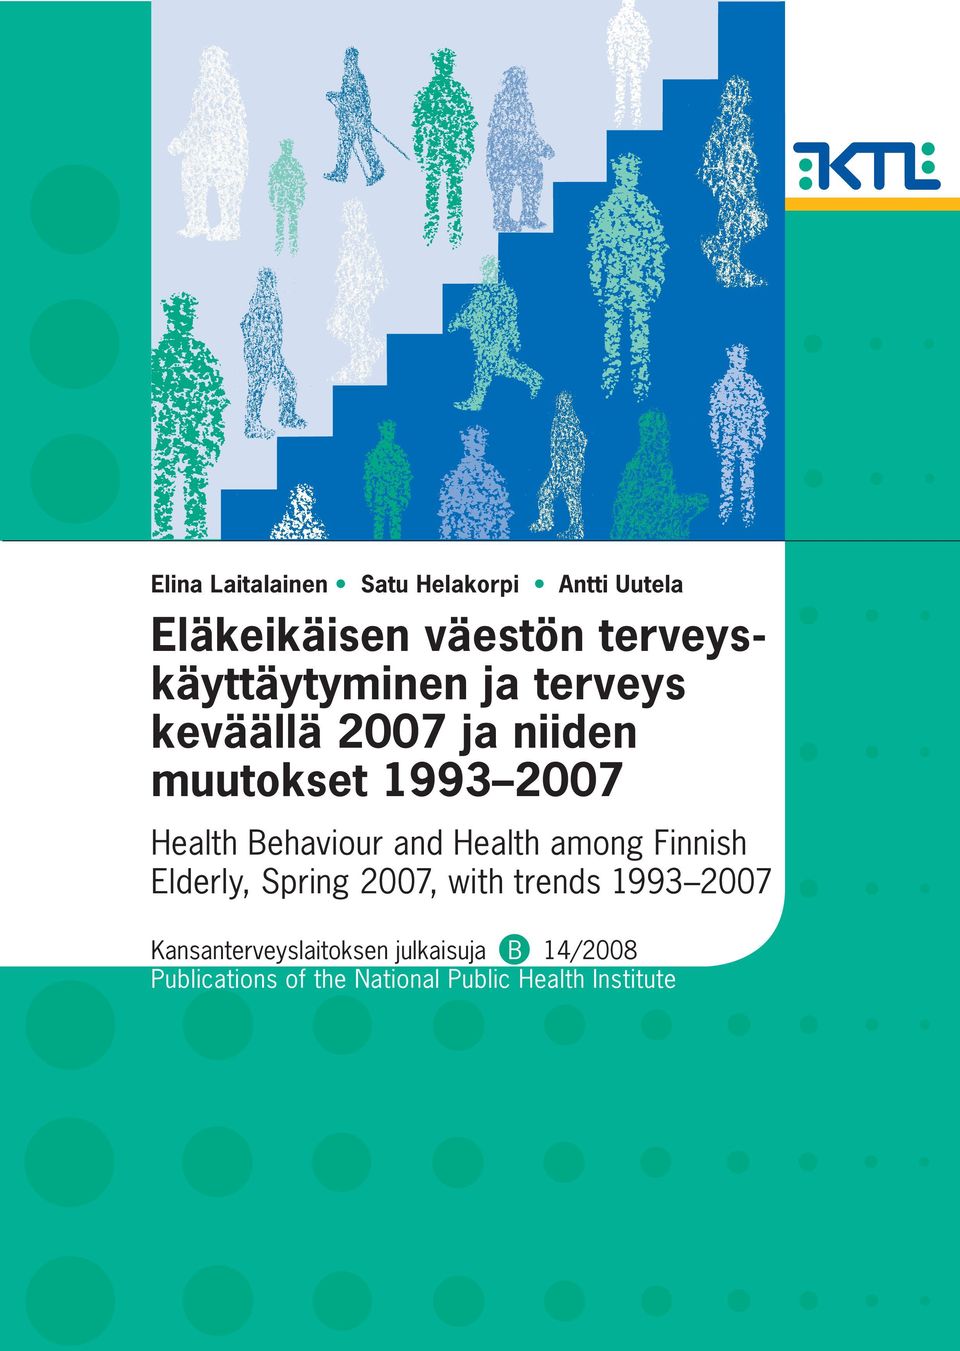 Health Behaviour and Health among Finnish Elderly, Spring 2007, with trends 1993